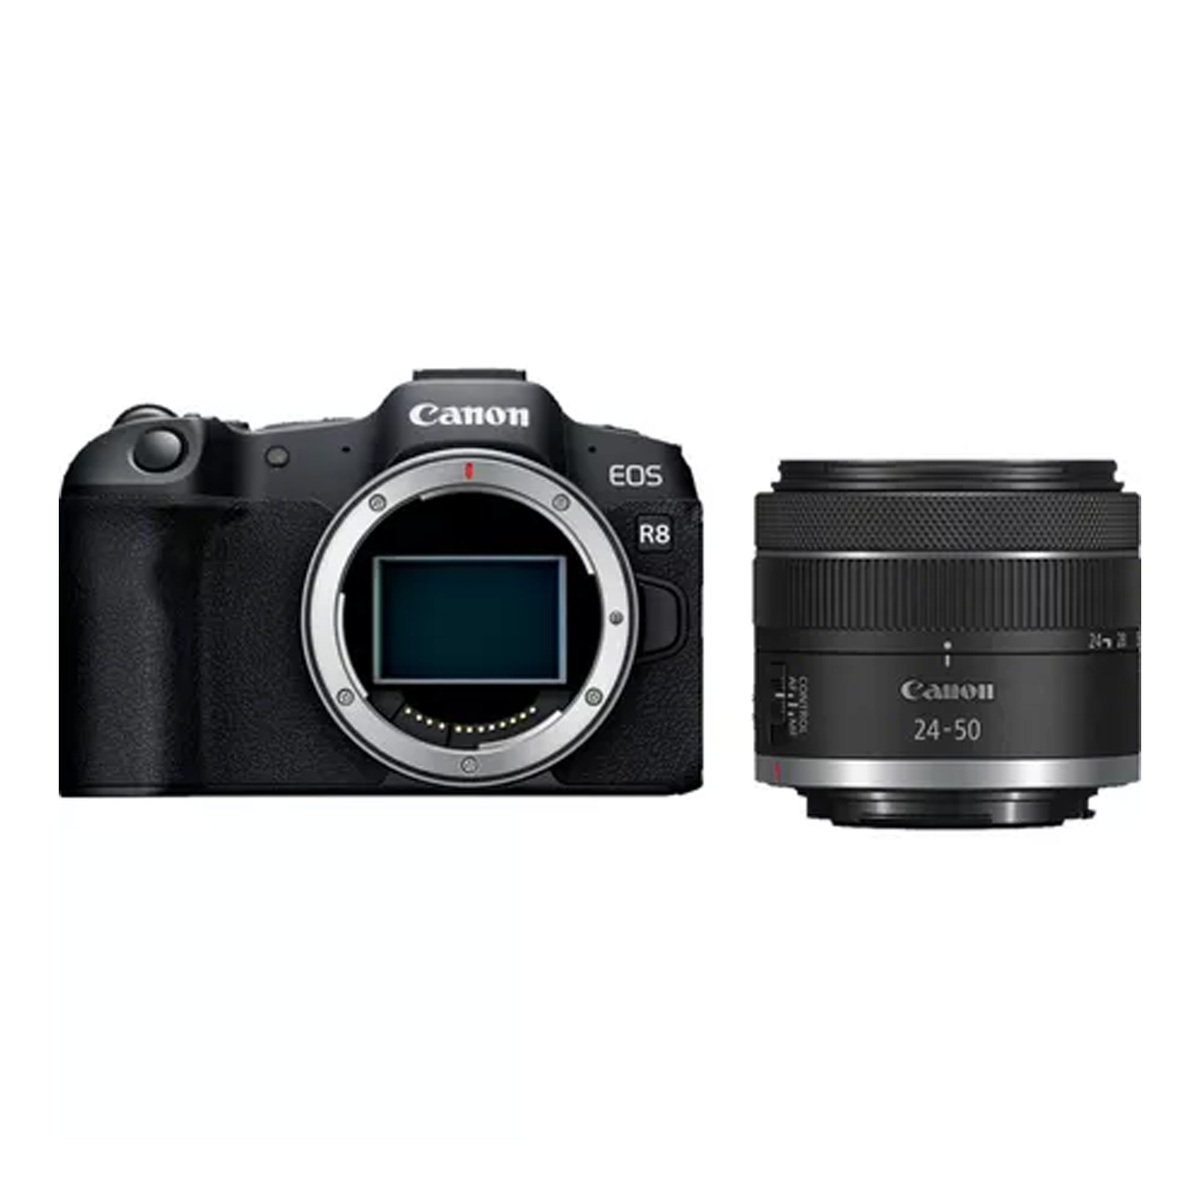 Canon EOS R8 Mirrorless Full Frame Camera with RF 24-50 mm f/4.5-6.3 IS STM Lens, Black